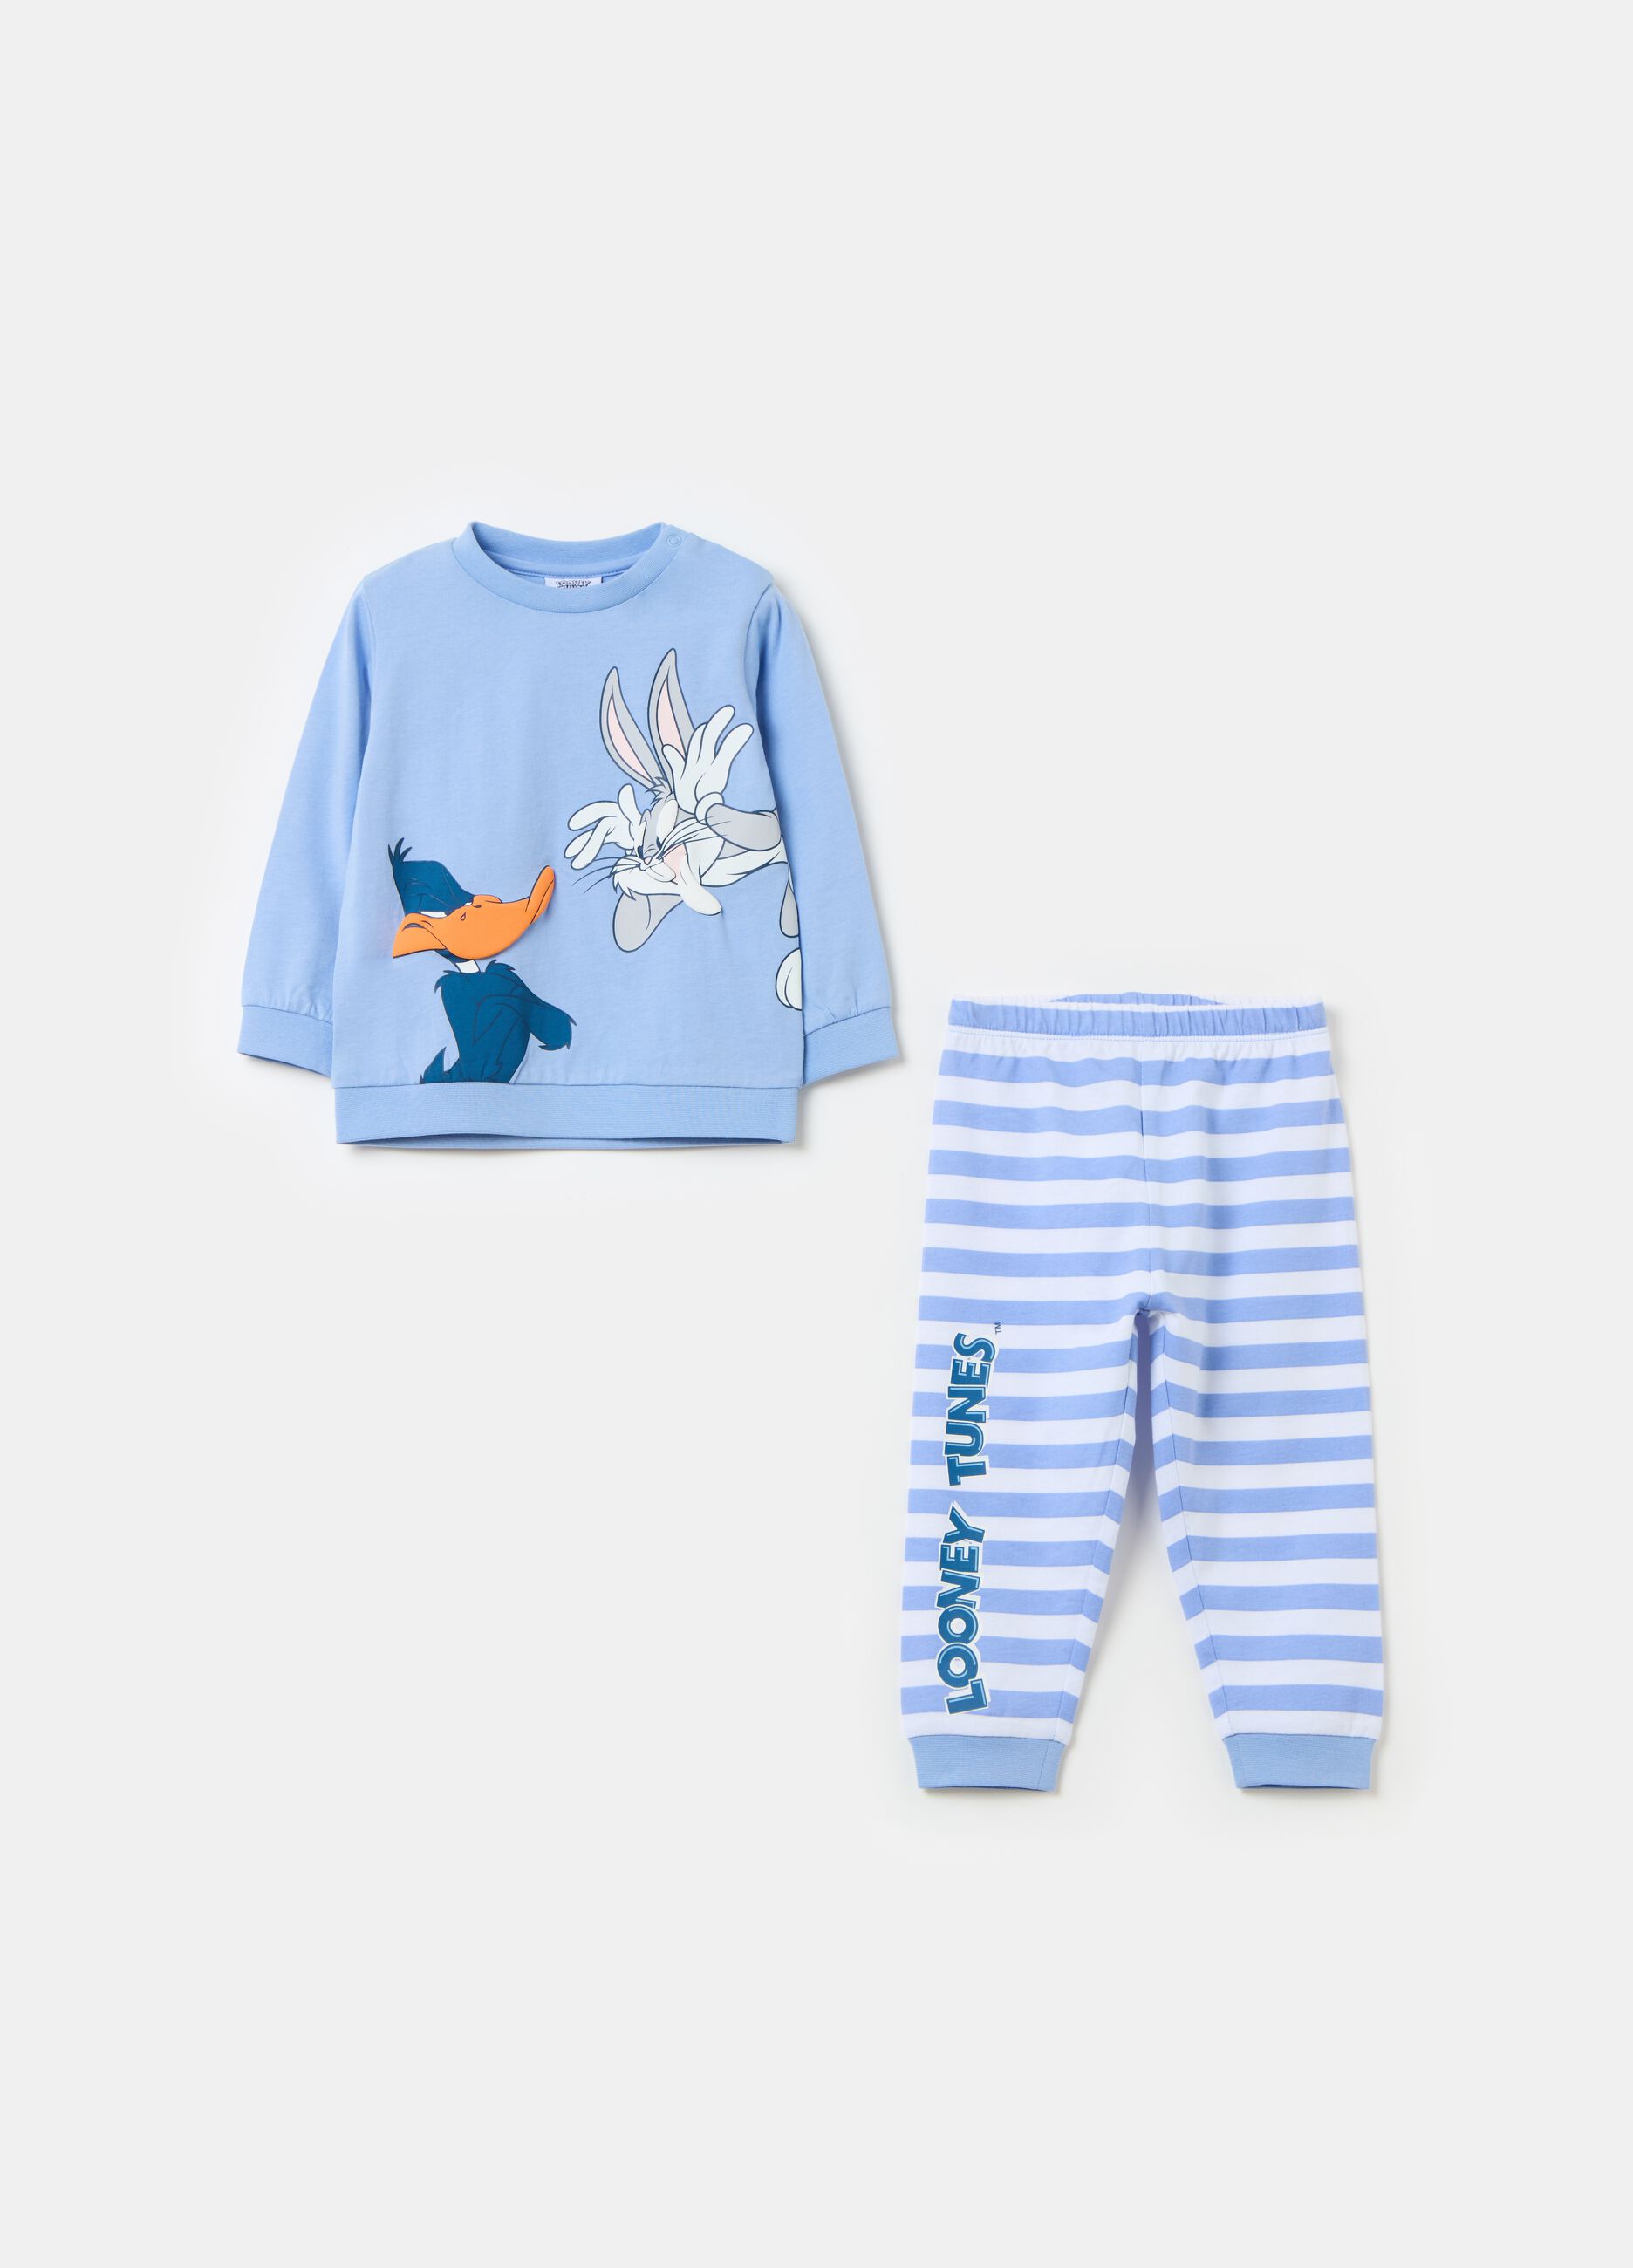 Bugs Bunny and Daffy Duck pyjamas in cotton